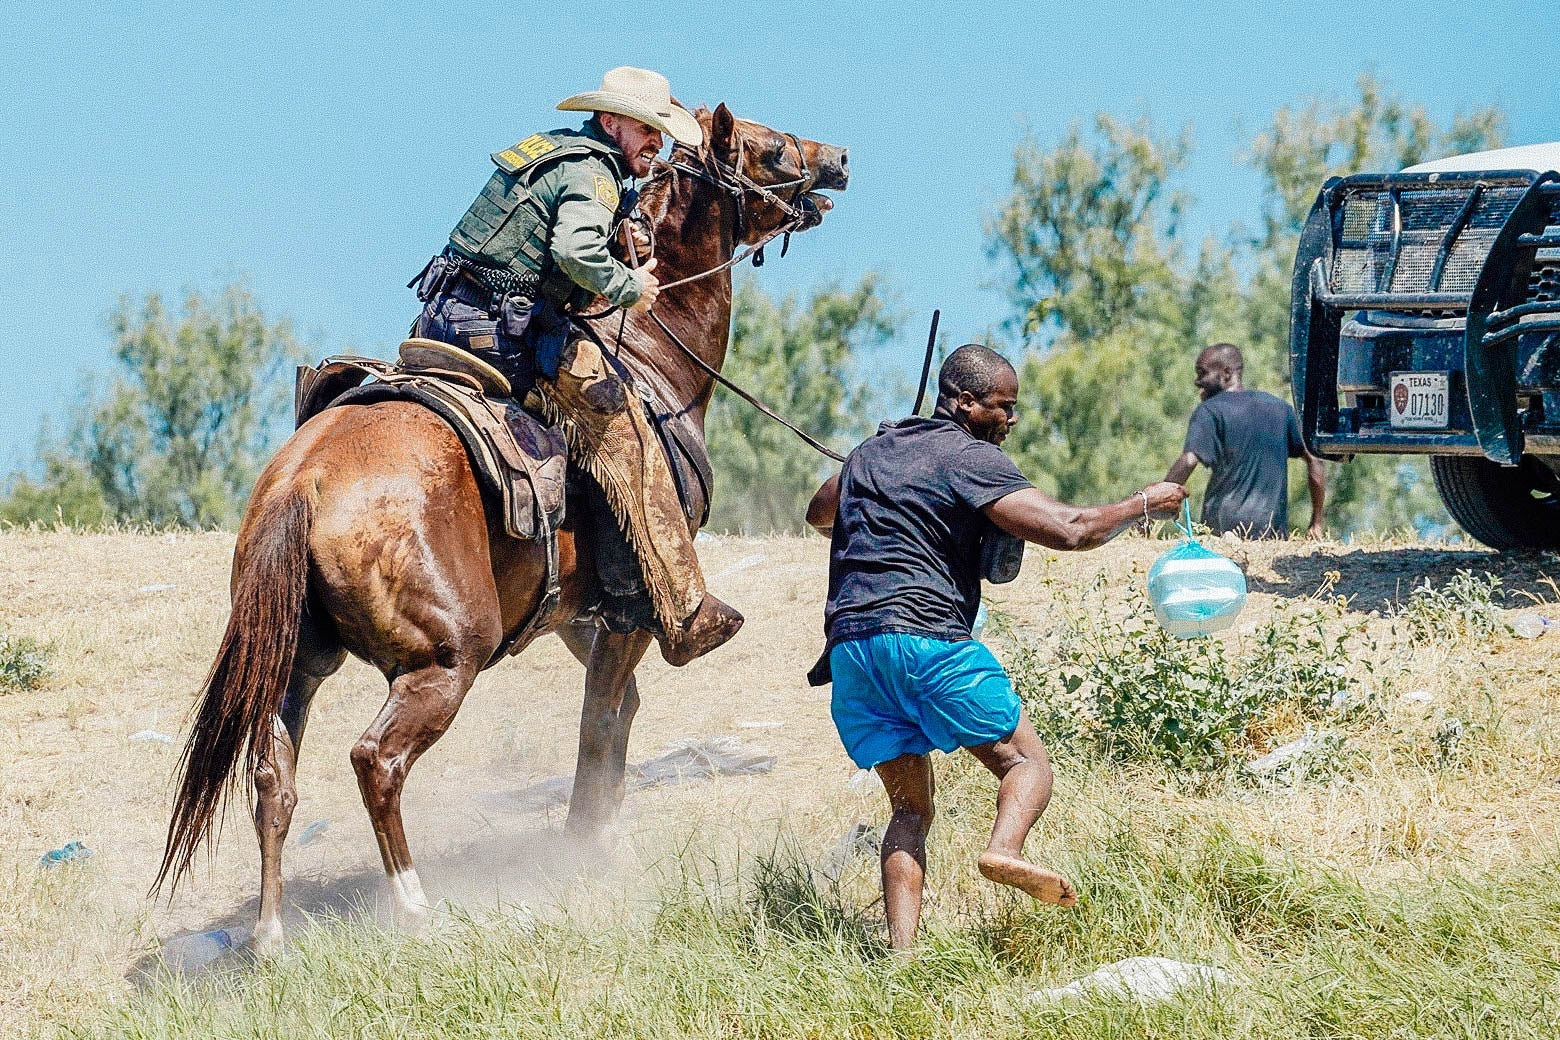 A border patrol agent on horseback chasing and using his reins to try to stop a Haitian migrant, who appears to be running. 